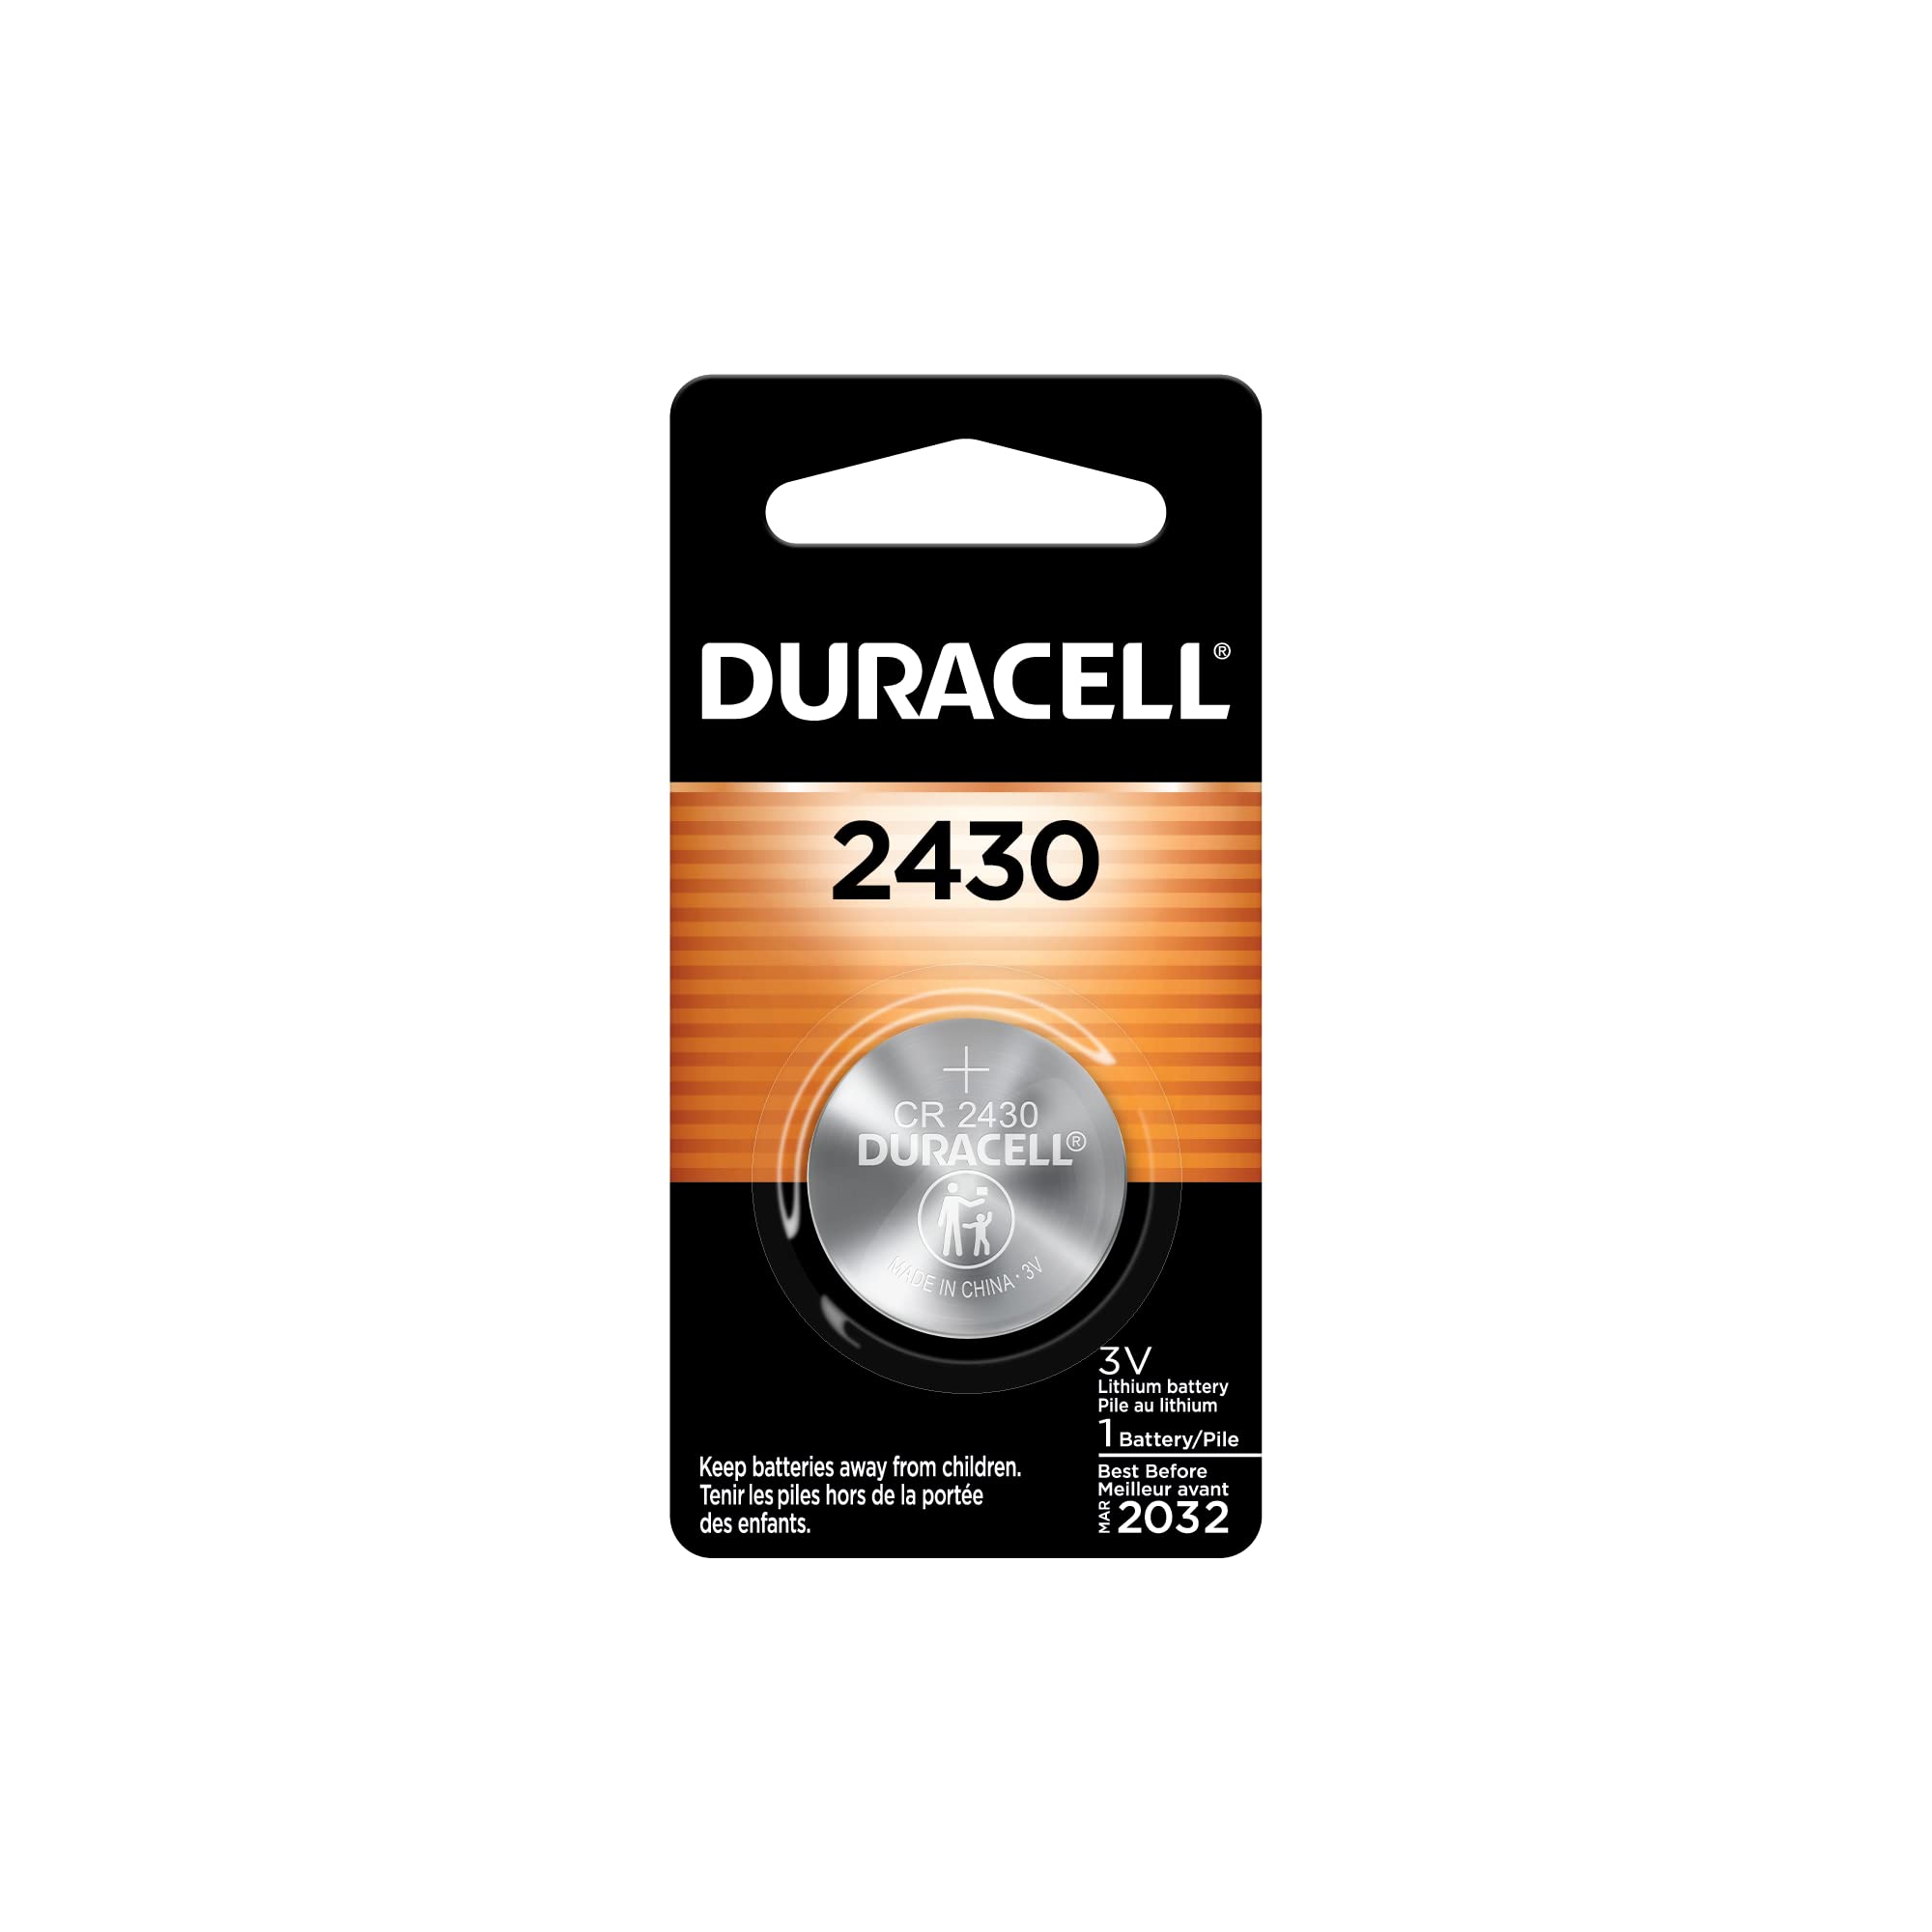 Duracell 2430 3V Lithium Battery, 1 Count Pack, Lithium Coin Battery for Medical and Fitness Devices, Watches, and more, CR Lithium 3 Volt Cell